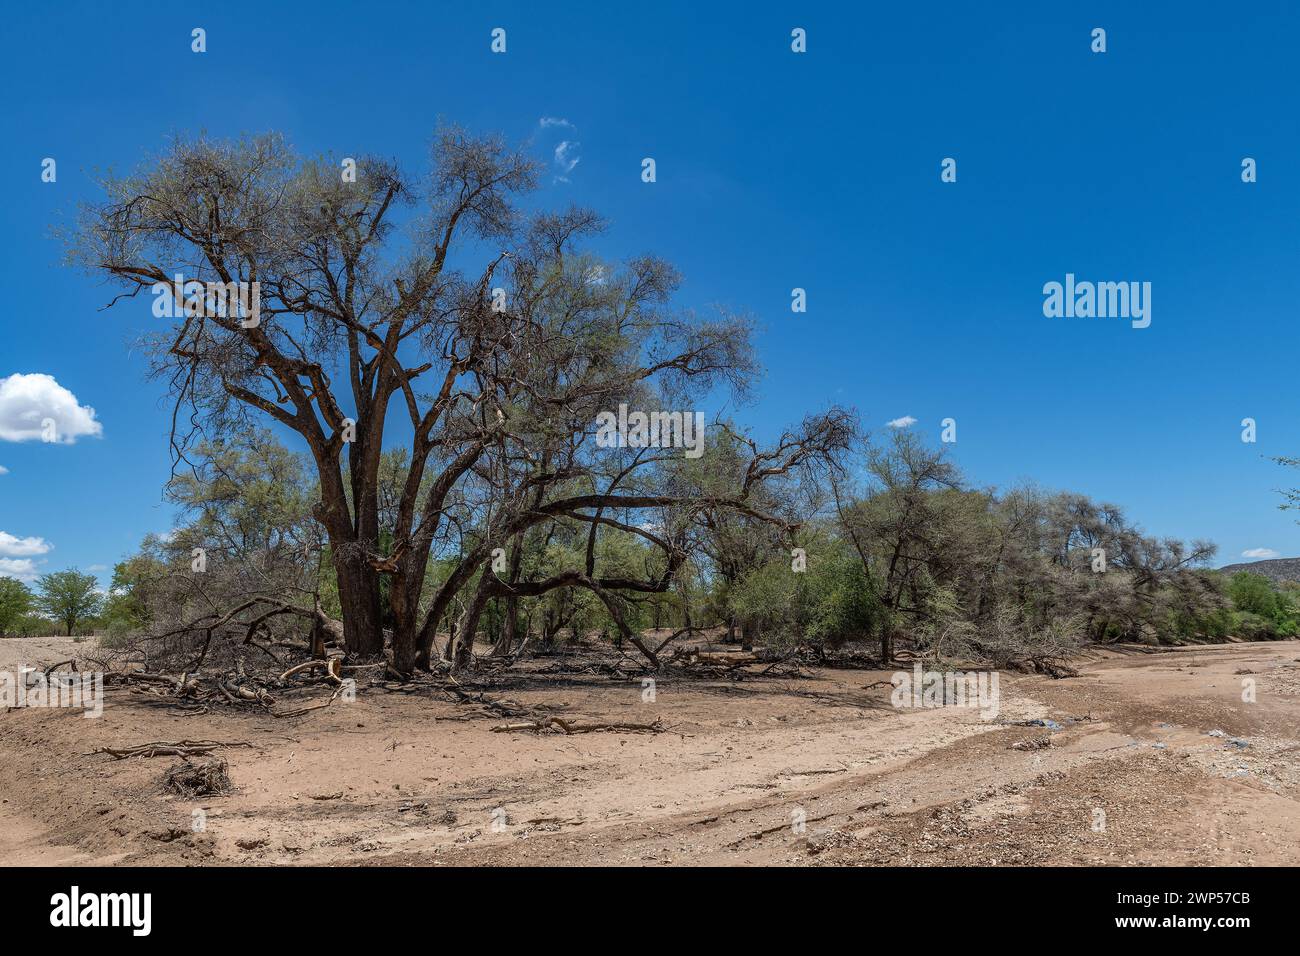 The dry riverbed of the Ugab River, Damaraland, Namibia Stock Photo